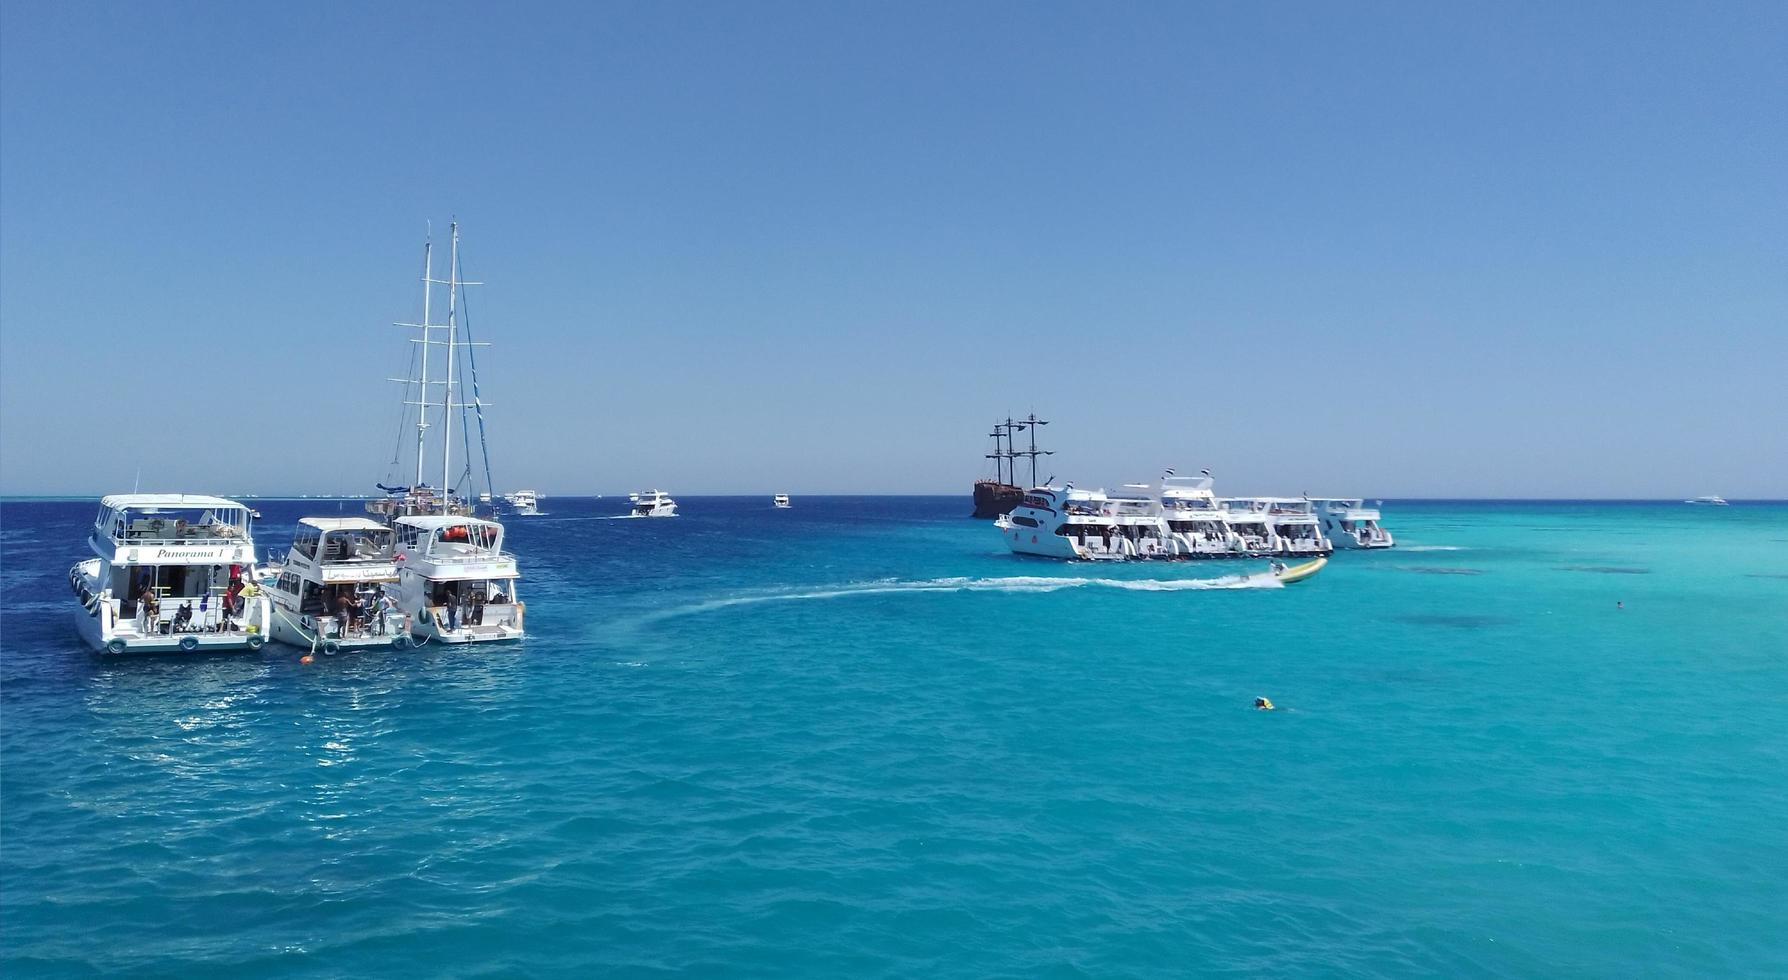 Yacht parking with tourists near White Island in Red sea. Egypt photo